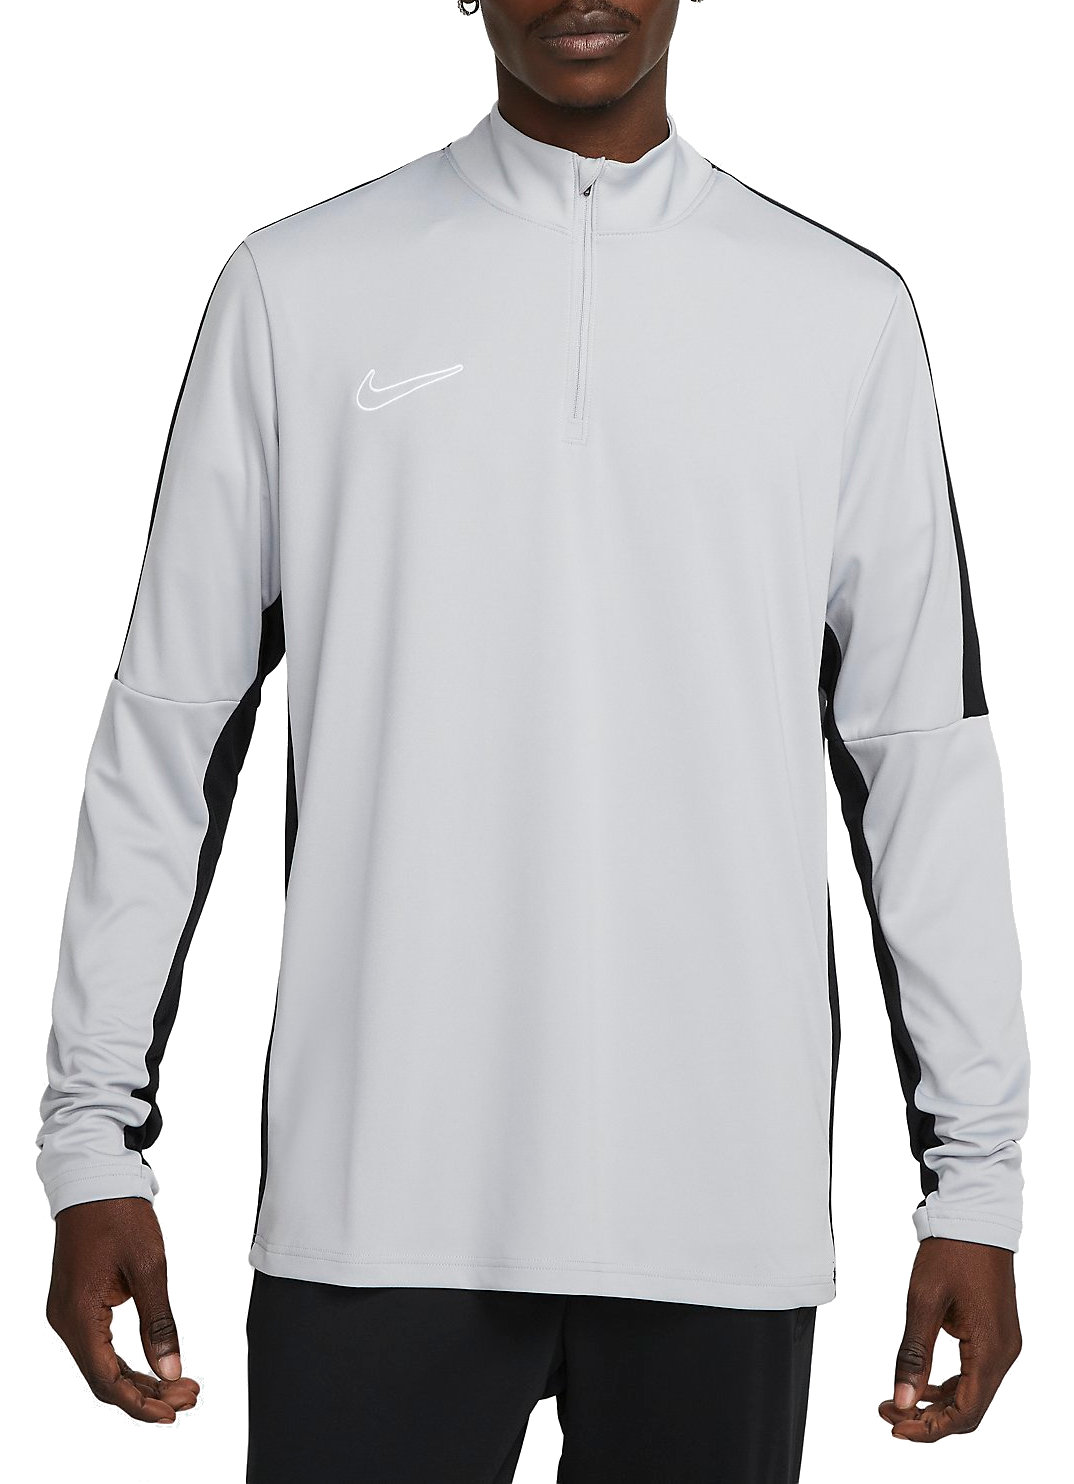 nike dri fit academy men s soccer drill top stock 545827 dr1352 012